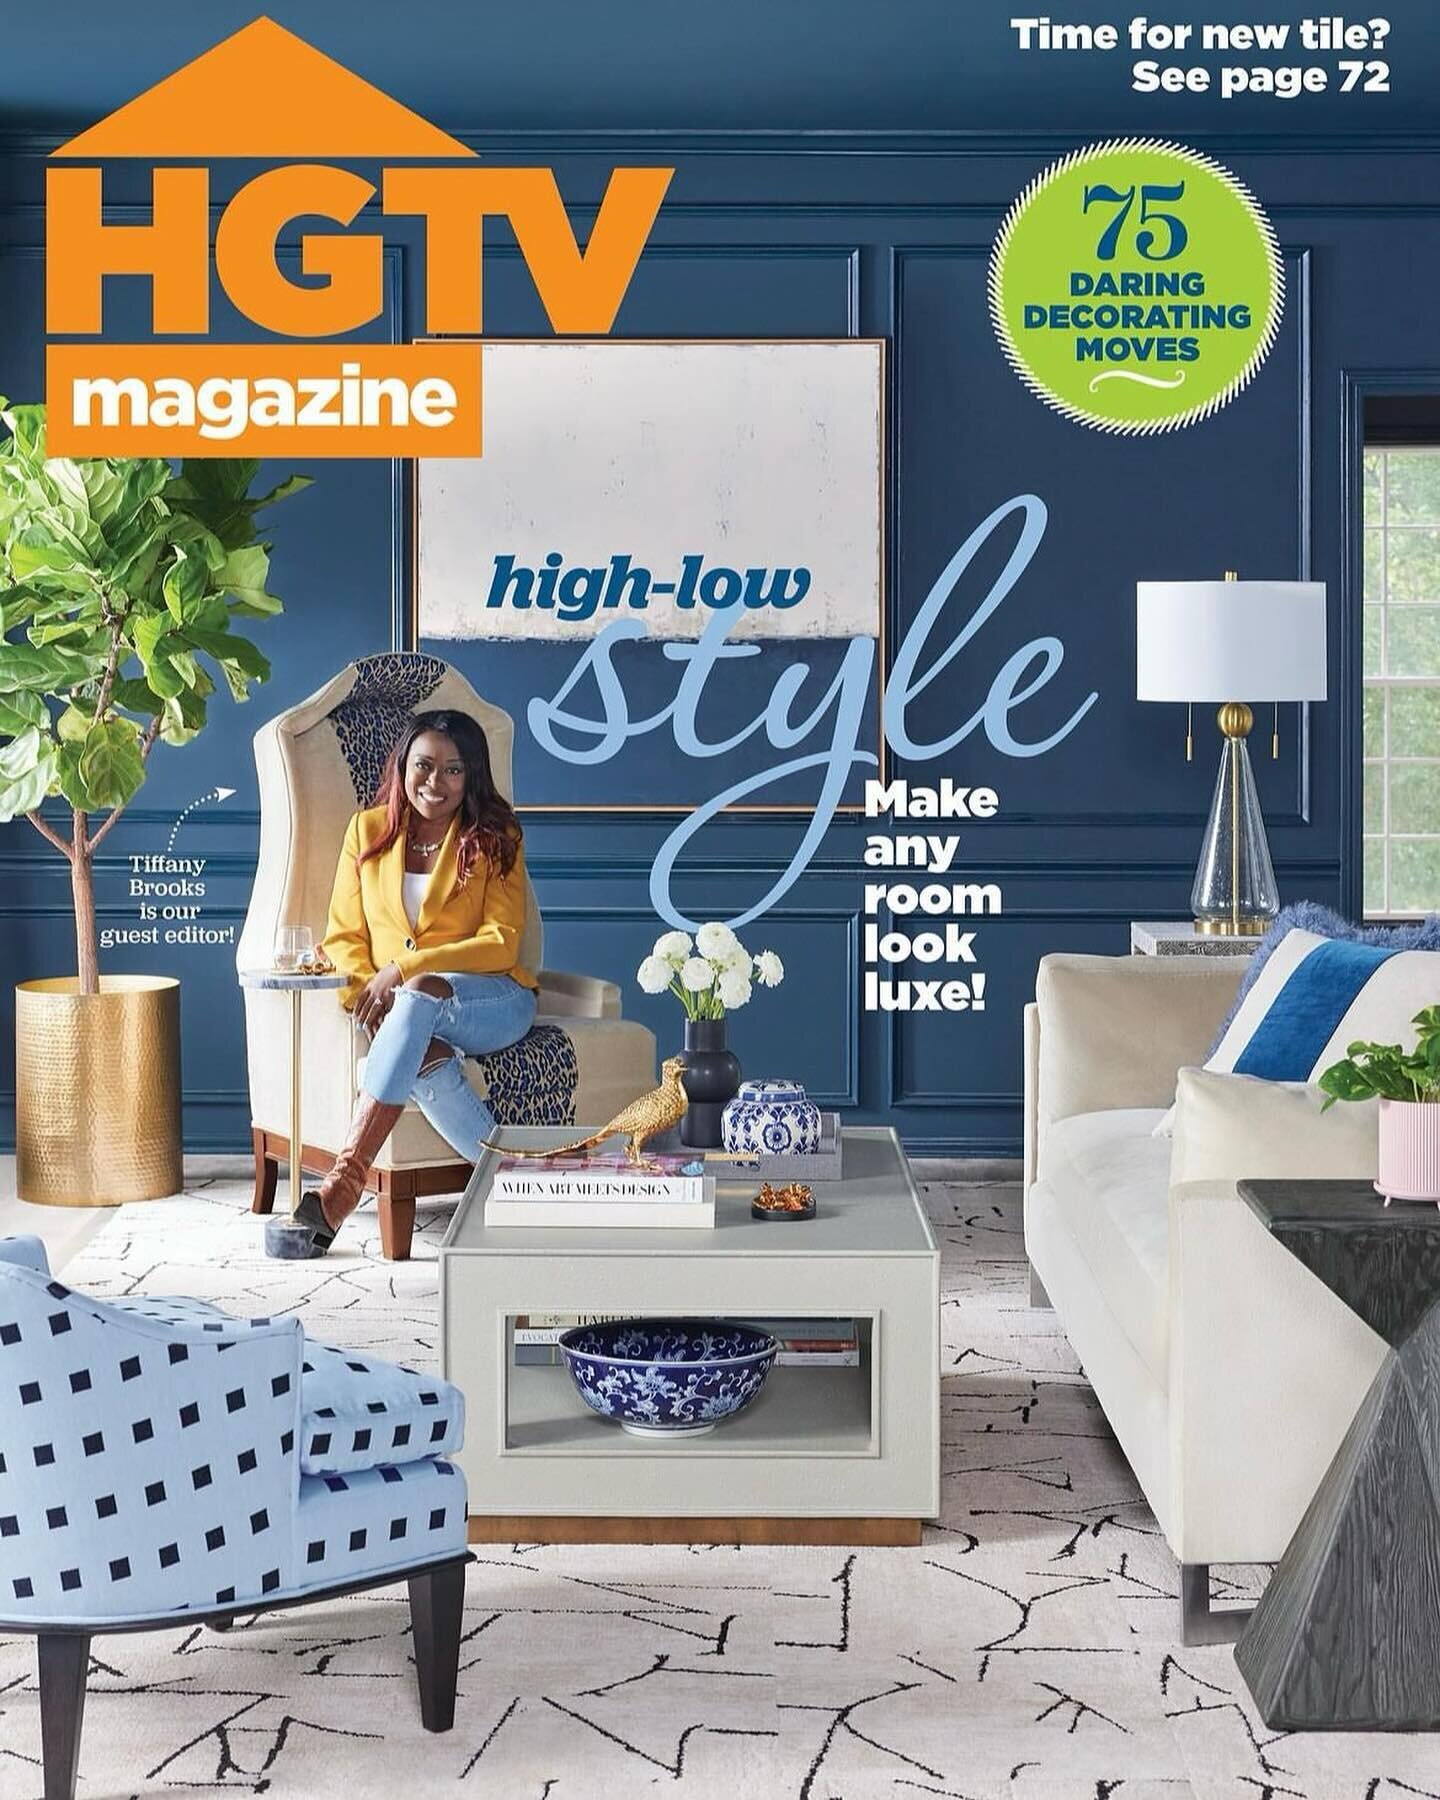 I shot the cover for the October issue of @hgtvmagazine @tiffanybrooksinteriors special thanks to everyone who helped make this shoot happen @jamijamijami @jessmalyn @demarzo_de_marzo